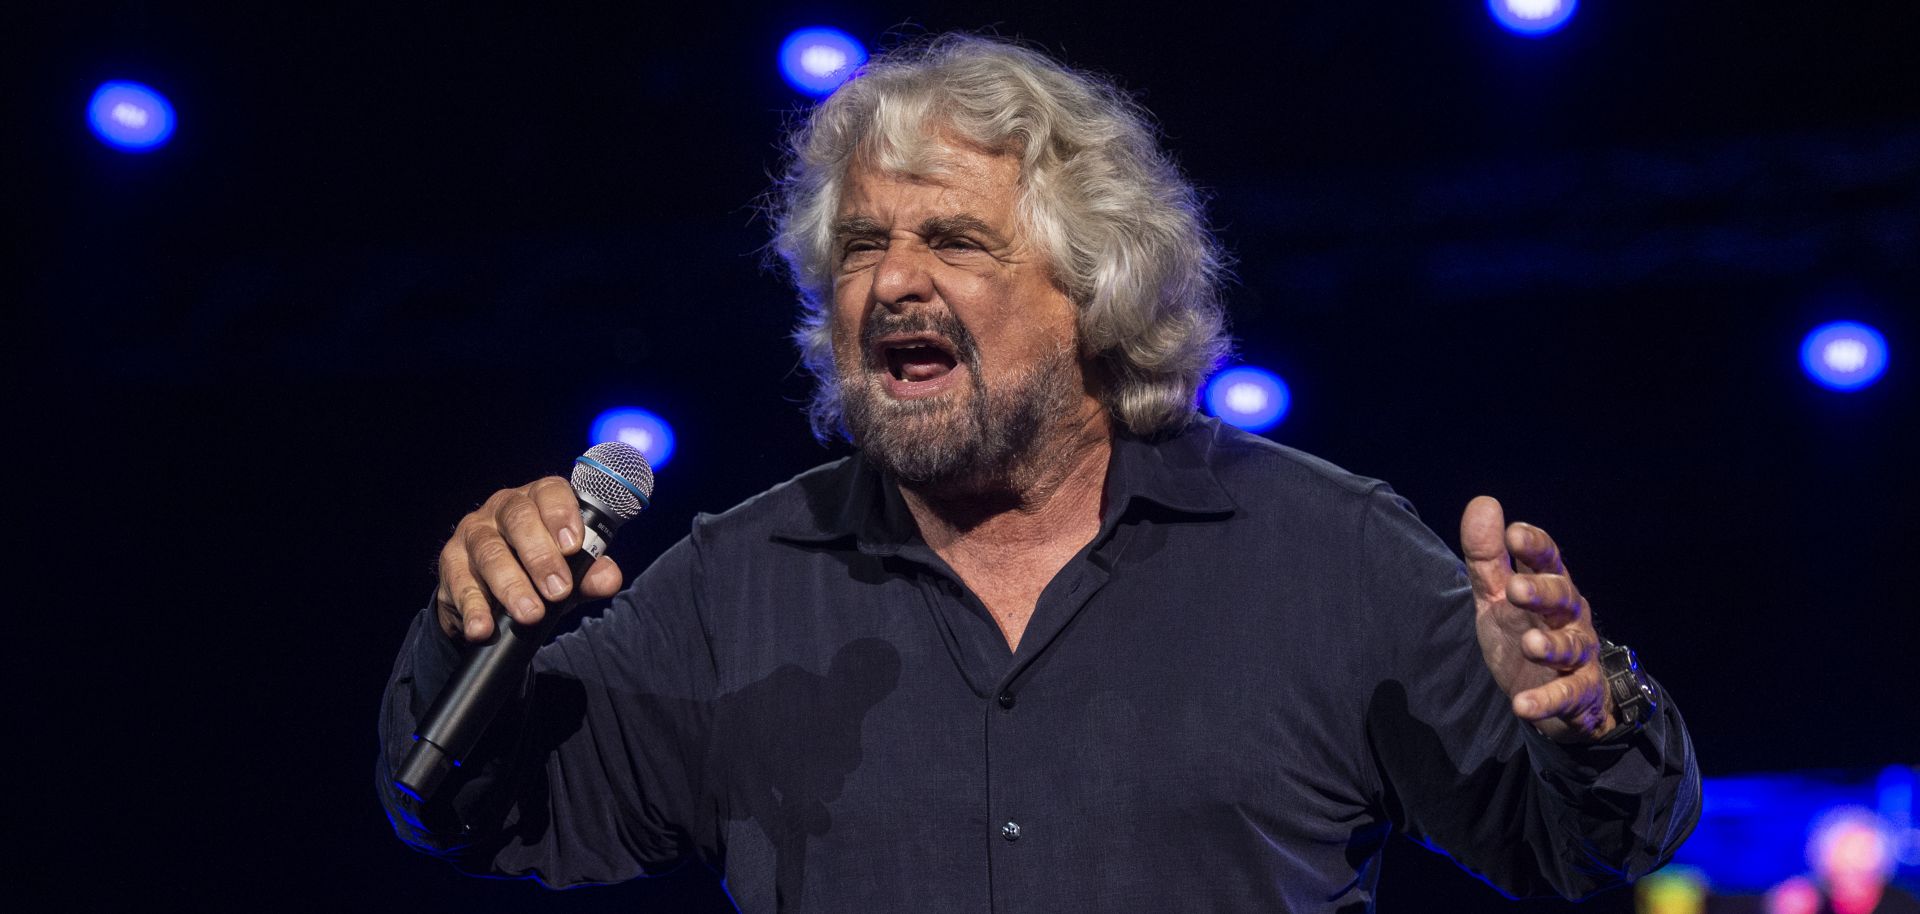 Comic Beppe Grillo, pictured here in Naples on Oct. 12, 2019, is a founder of Italy's anti-establishment 5-Star Movement.